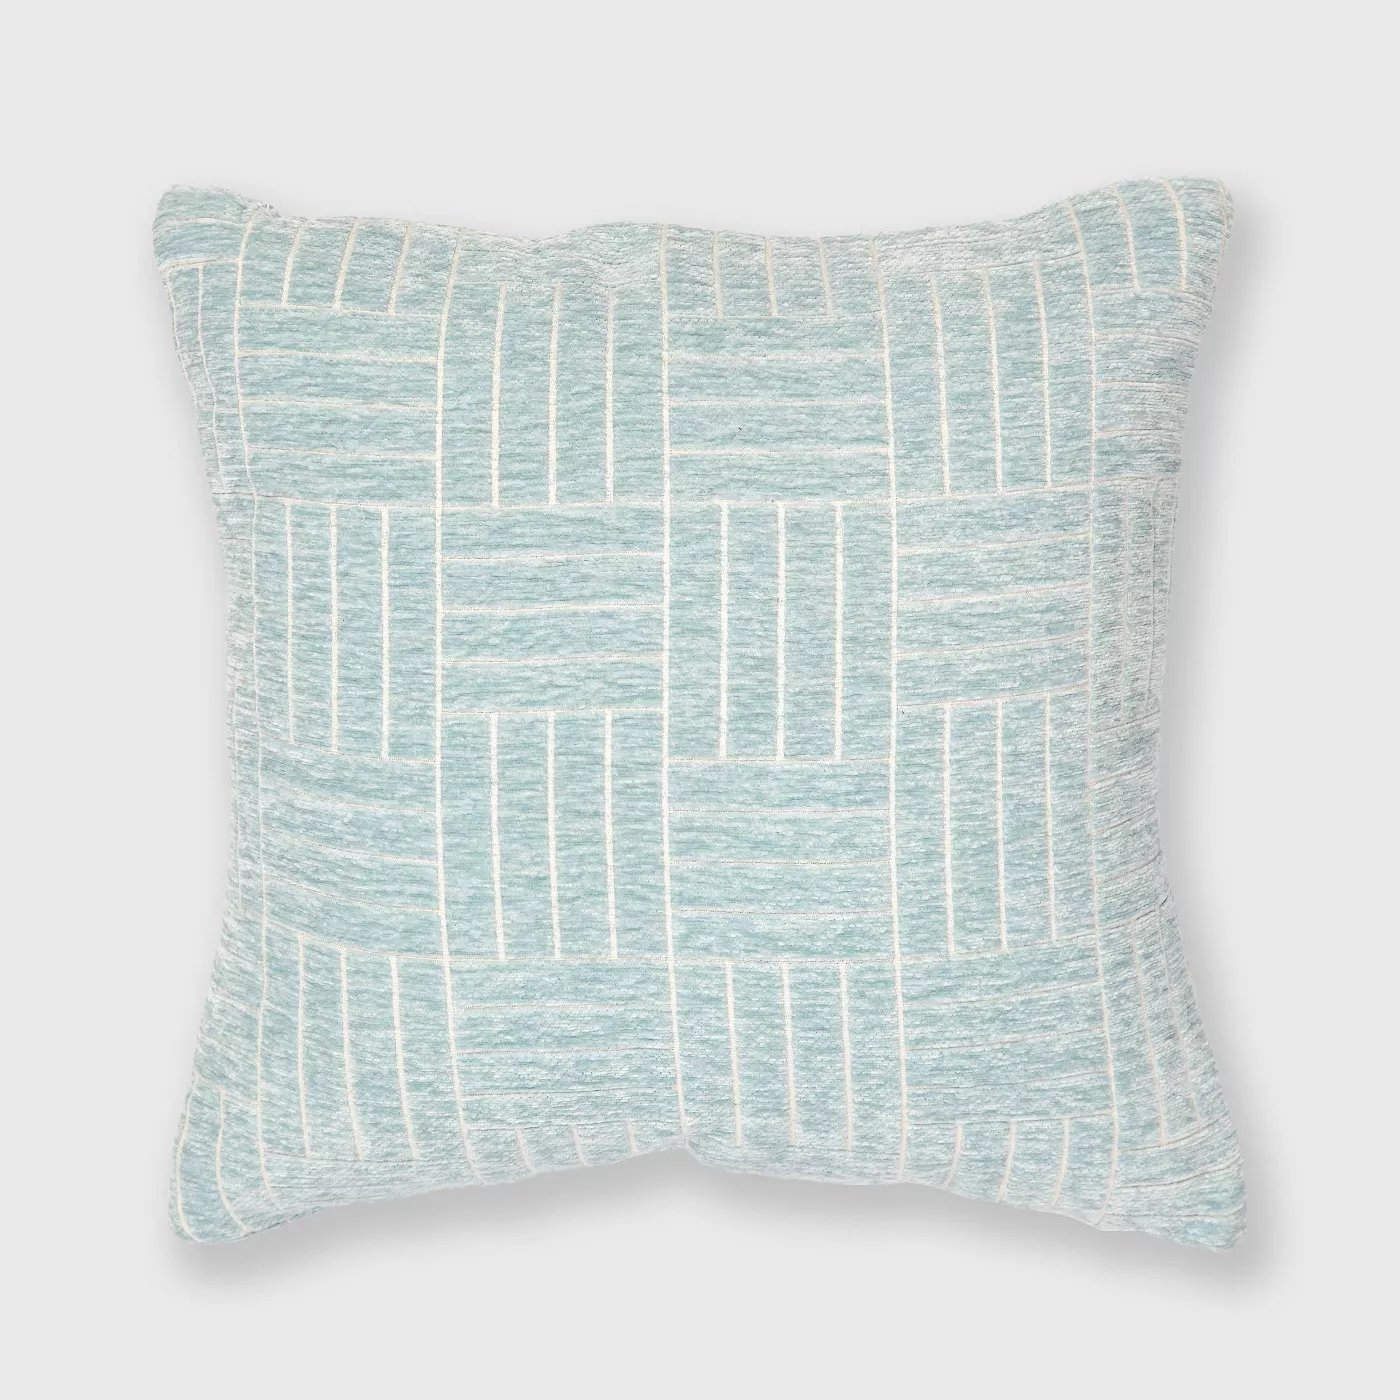 Staggered Striped Chenille Woven Jacquard Throw Pillow - freshmint - Image 0